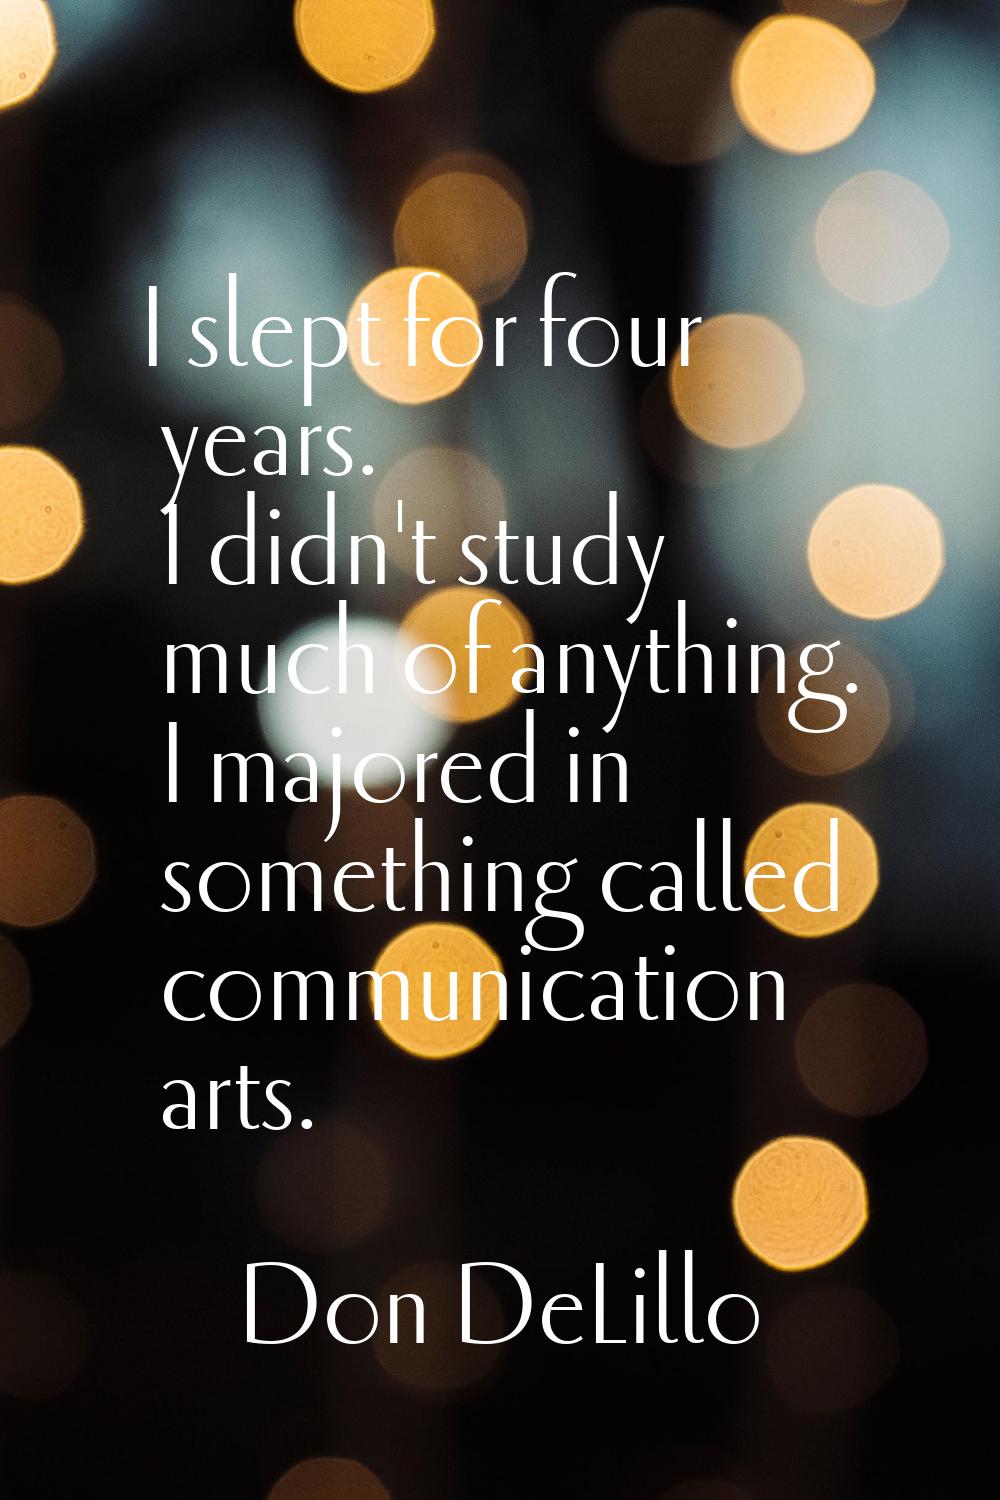 I slept for four years. I didn't study much of anything. I majored in something called communicatio